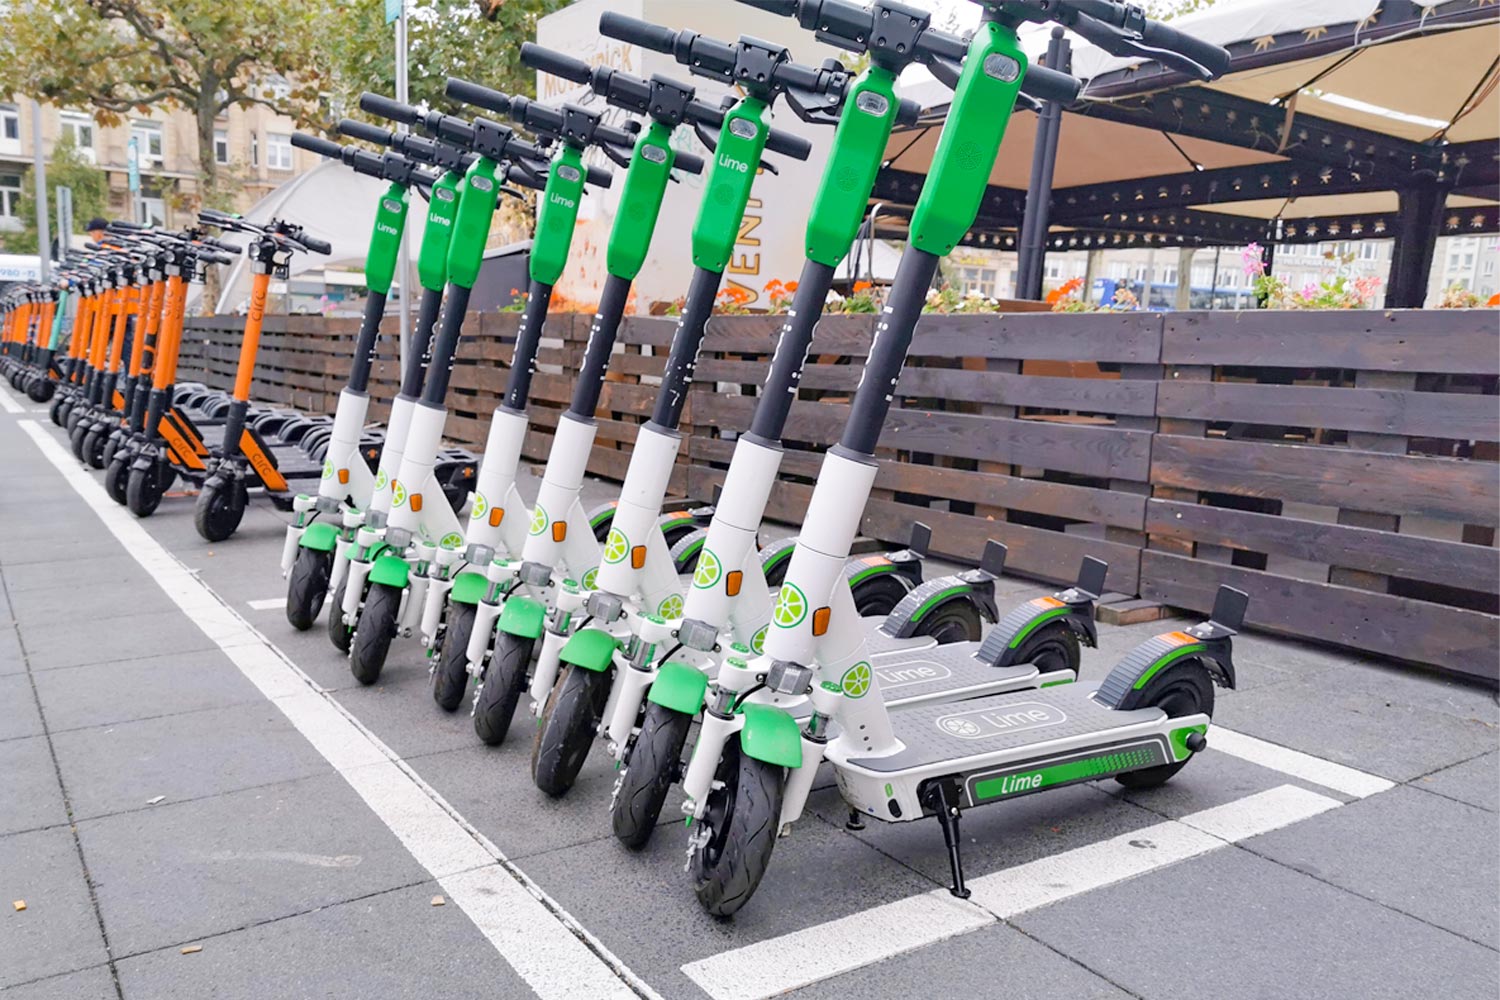 Line of E-Scooters on a City Street